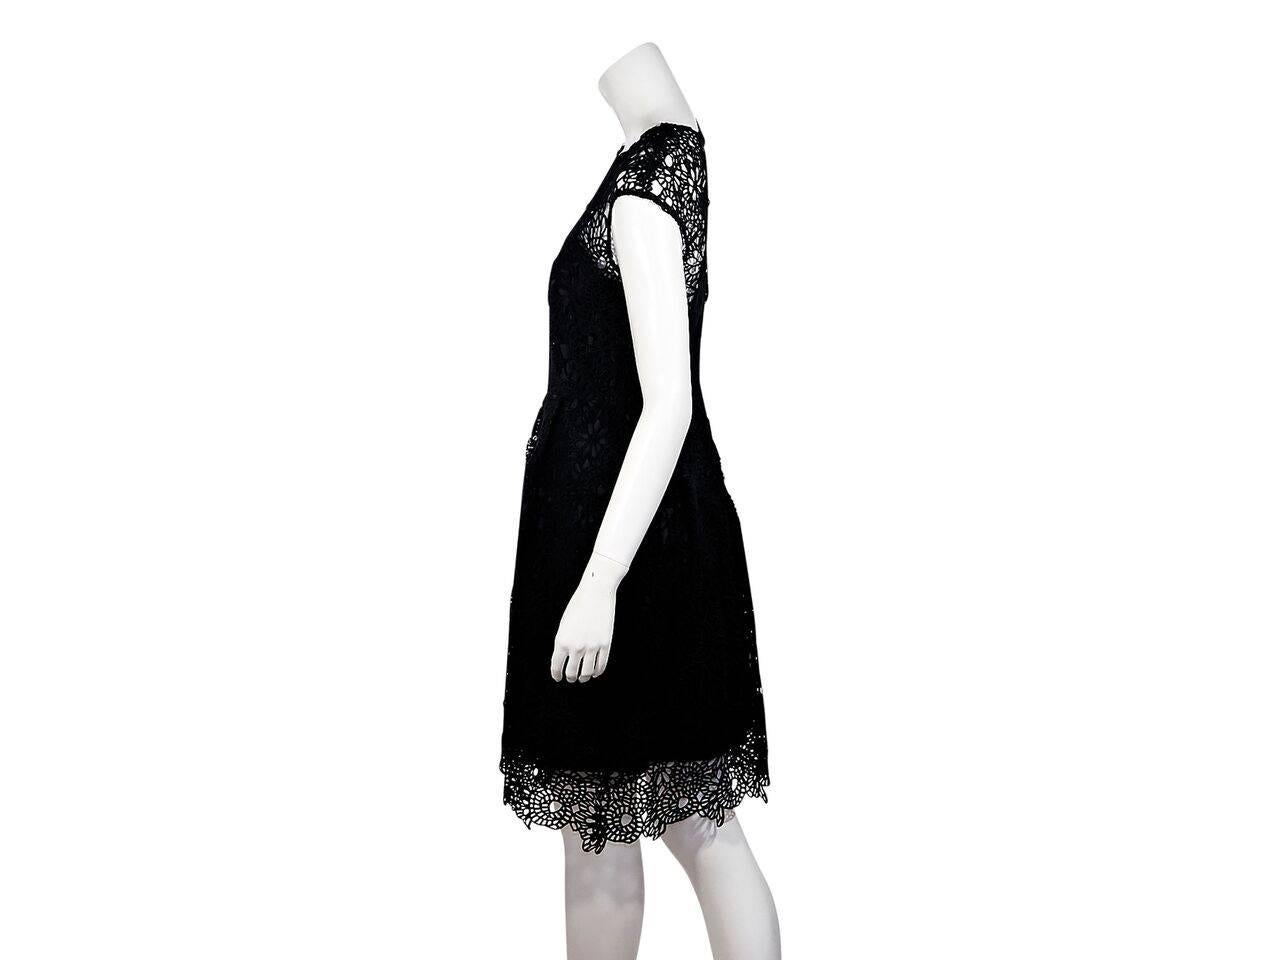 Product details:  Black crochet sheath dress by Lela Rose.  Roundneck.  Cap sleeves.  Concealed zip back closure.  
Condition: Pre-owned. New with tags.
Est. Retail $ 698.00